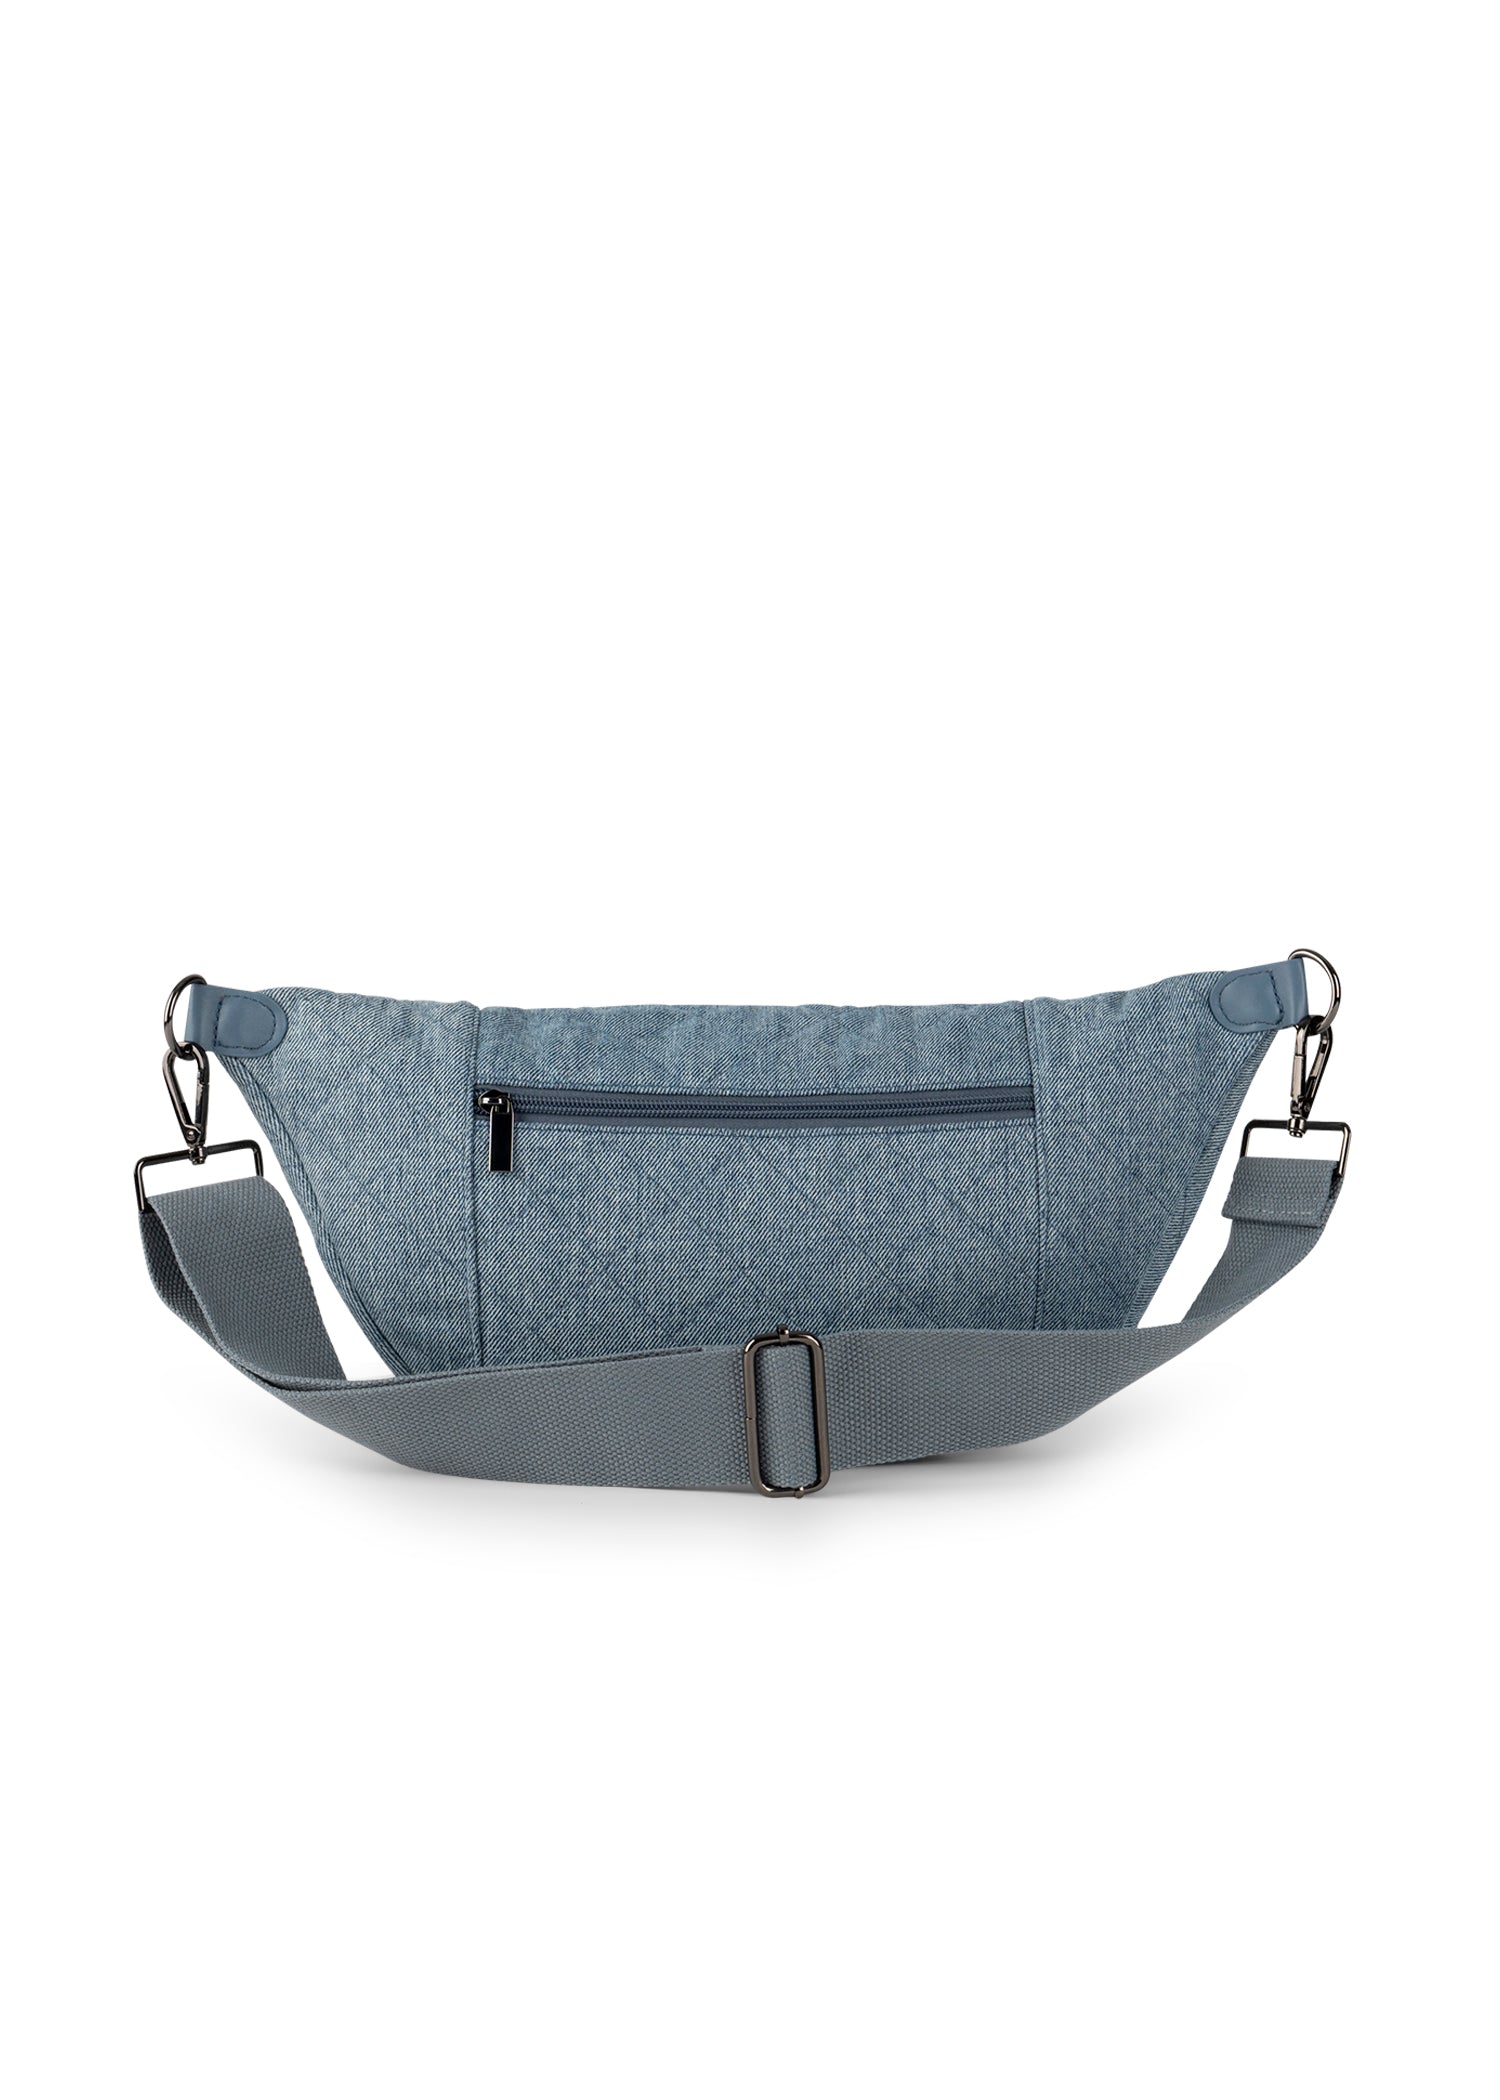 The Emily Montreal Sling Bag